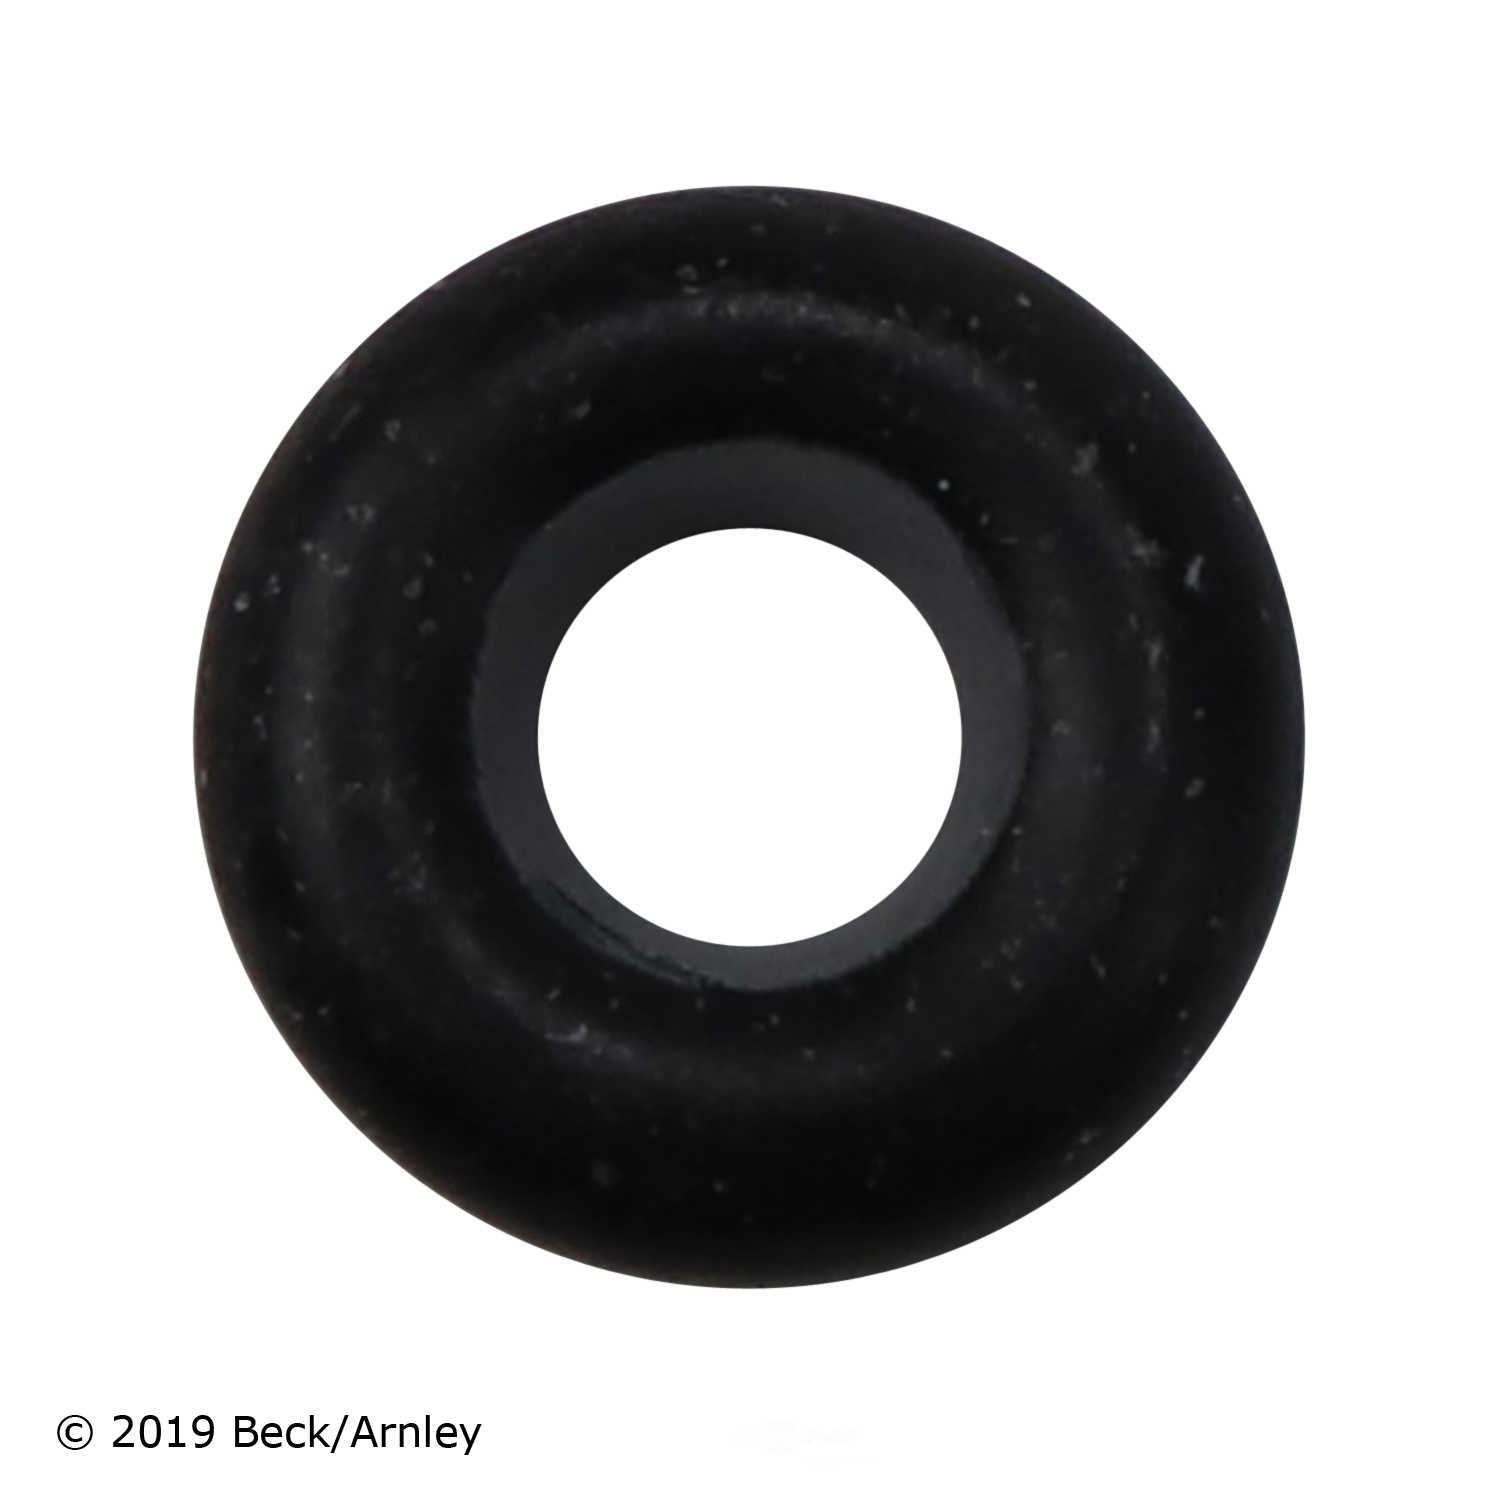 BECK/ARNLEY - Fuel Injection Nozzle O-Ring Kit - BAR 158-0020